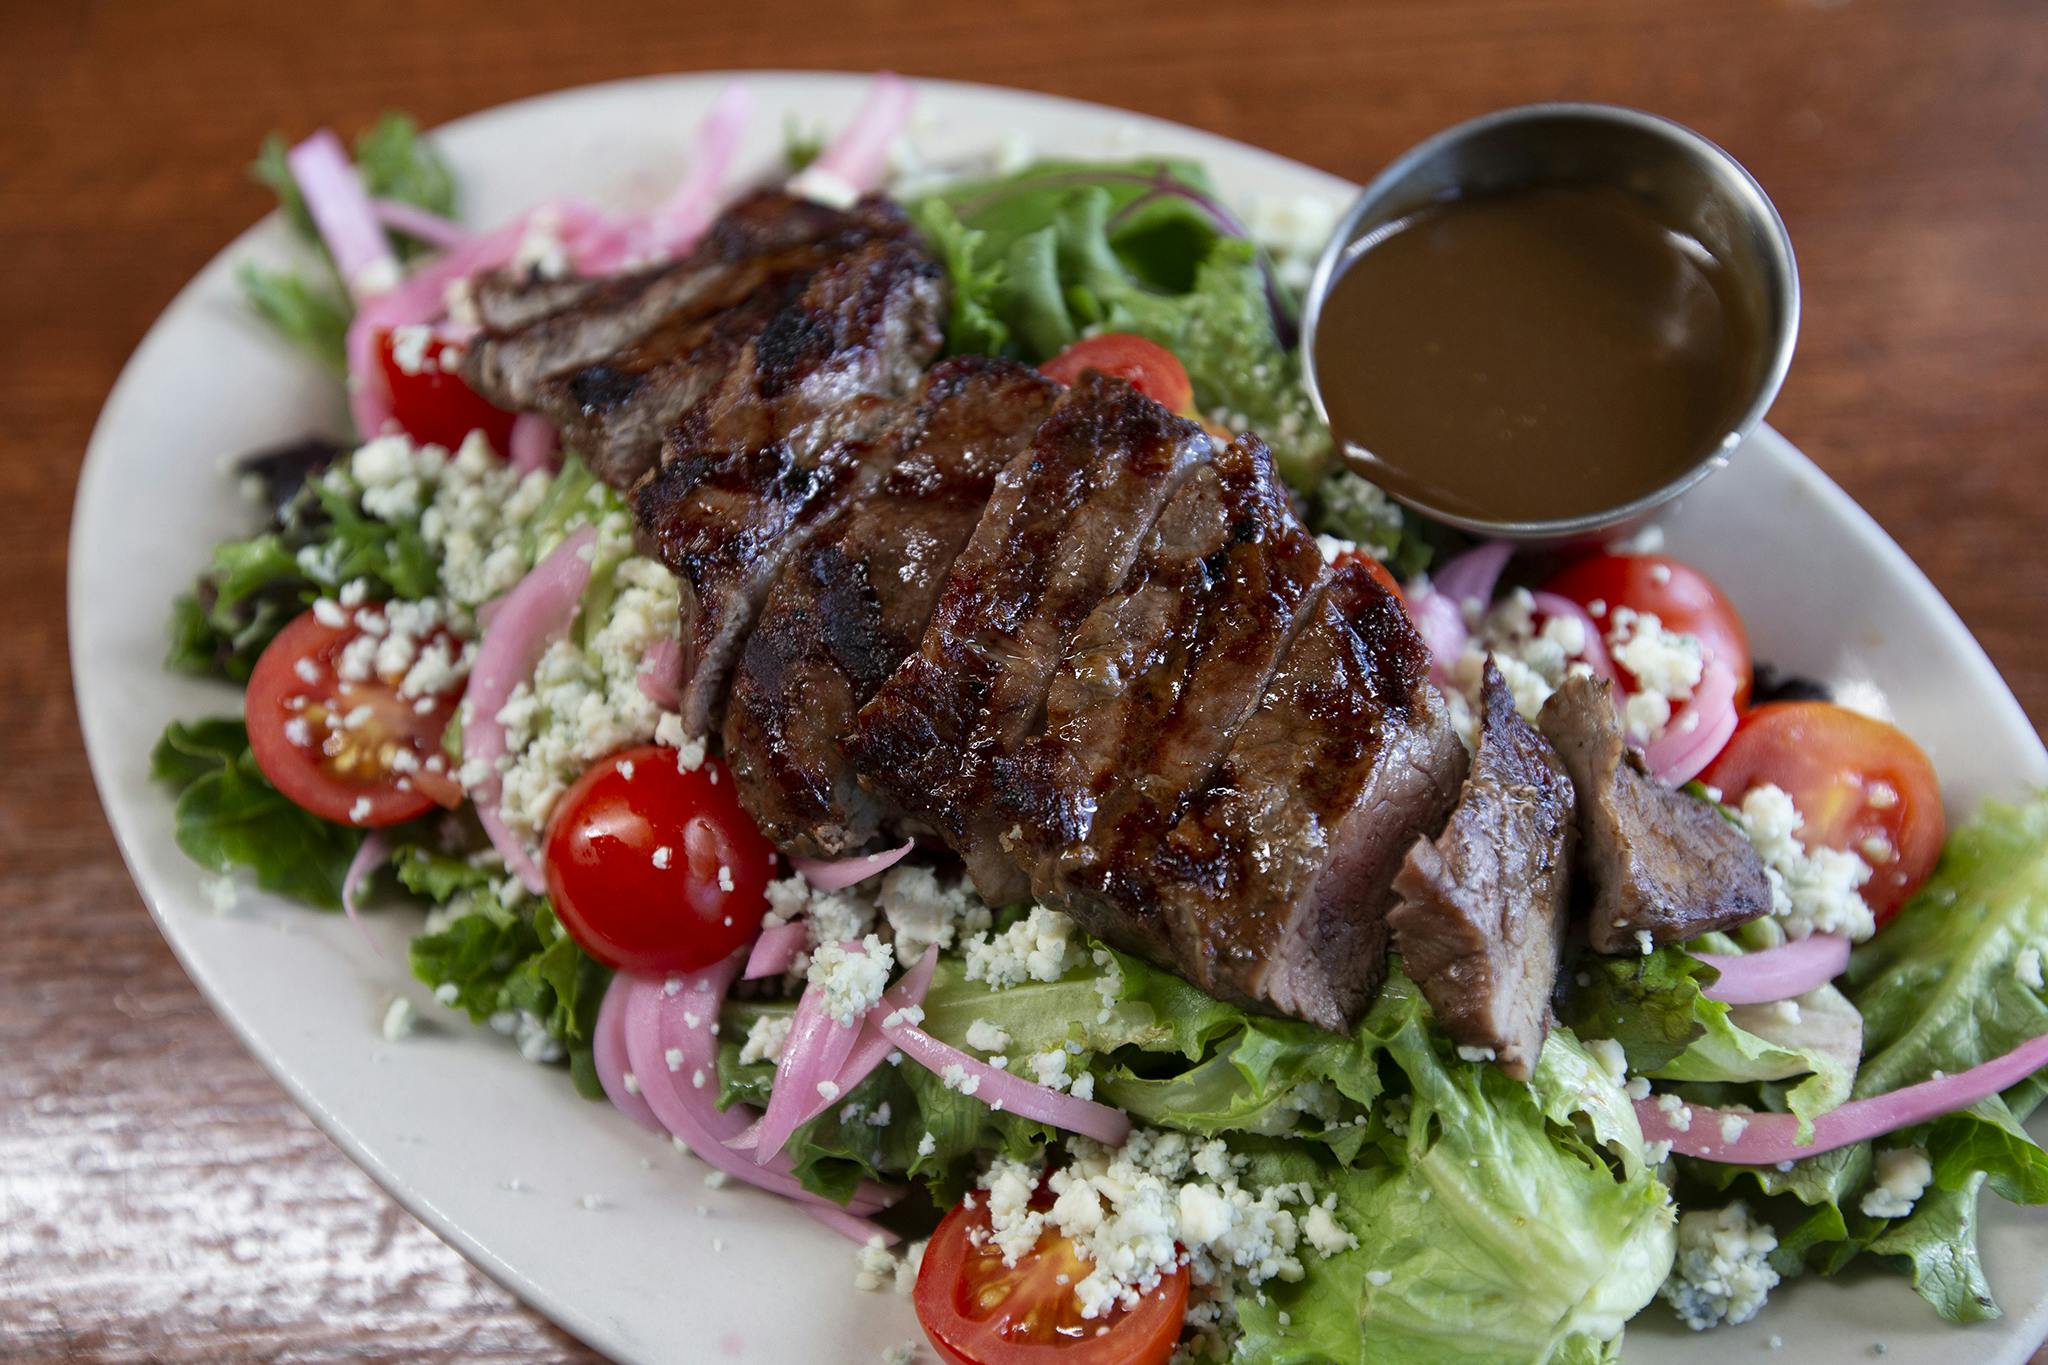 Steak Salad from Candlelite Chicago in Chicago, IL